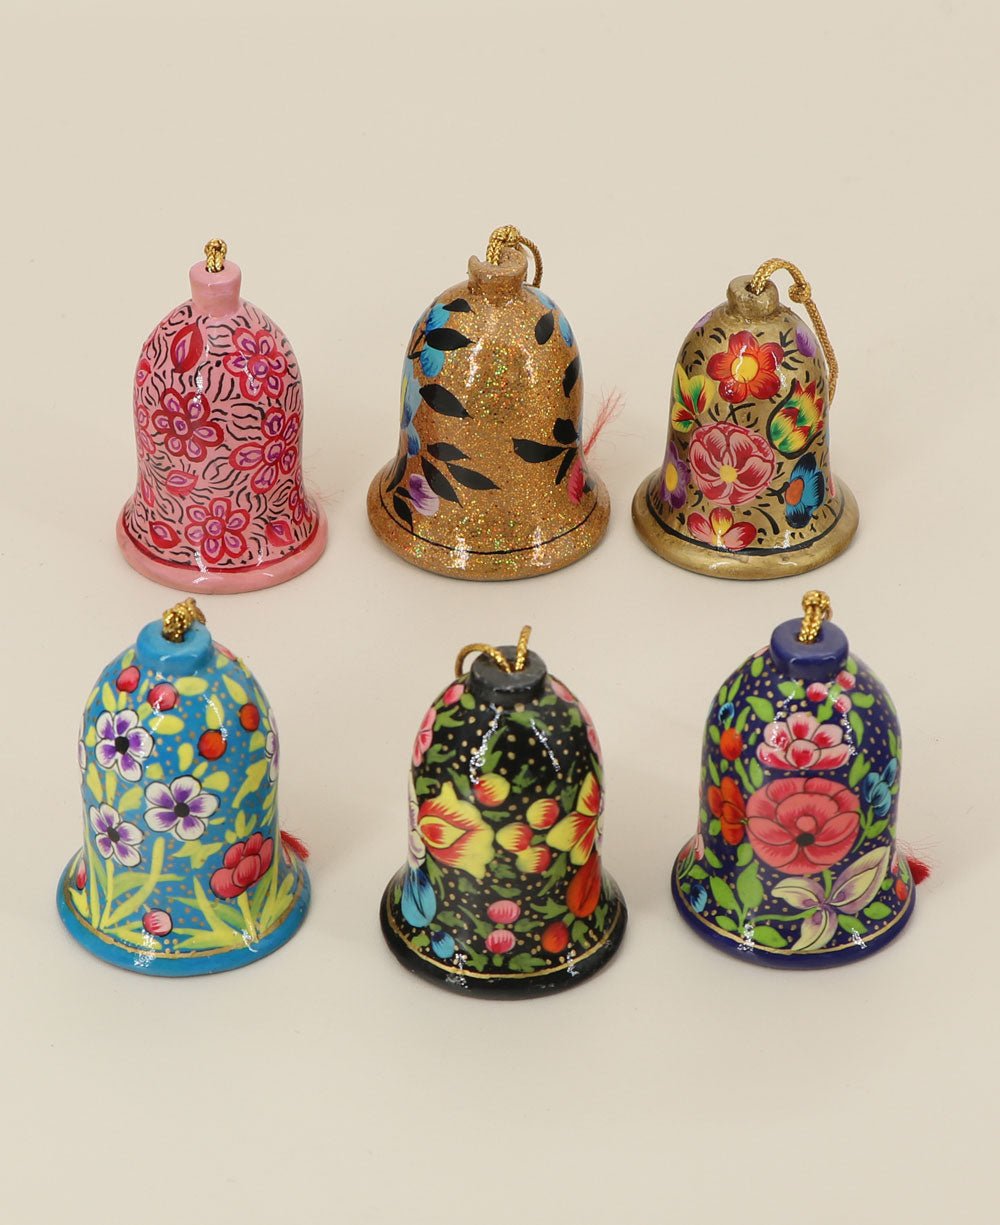 Fairtrade Artisan Made Set 6 Decorative Bell Shaped Ornaments - Holiday Ornaments